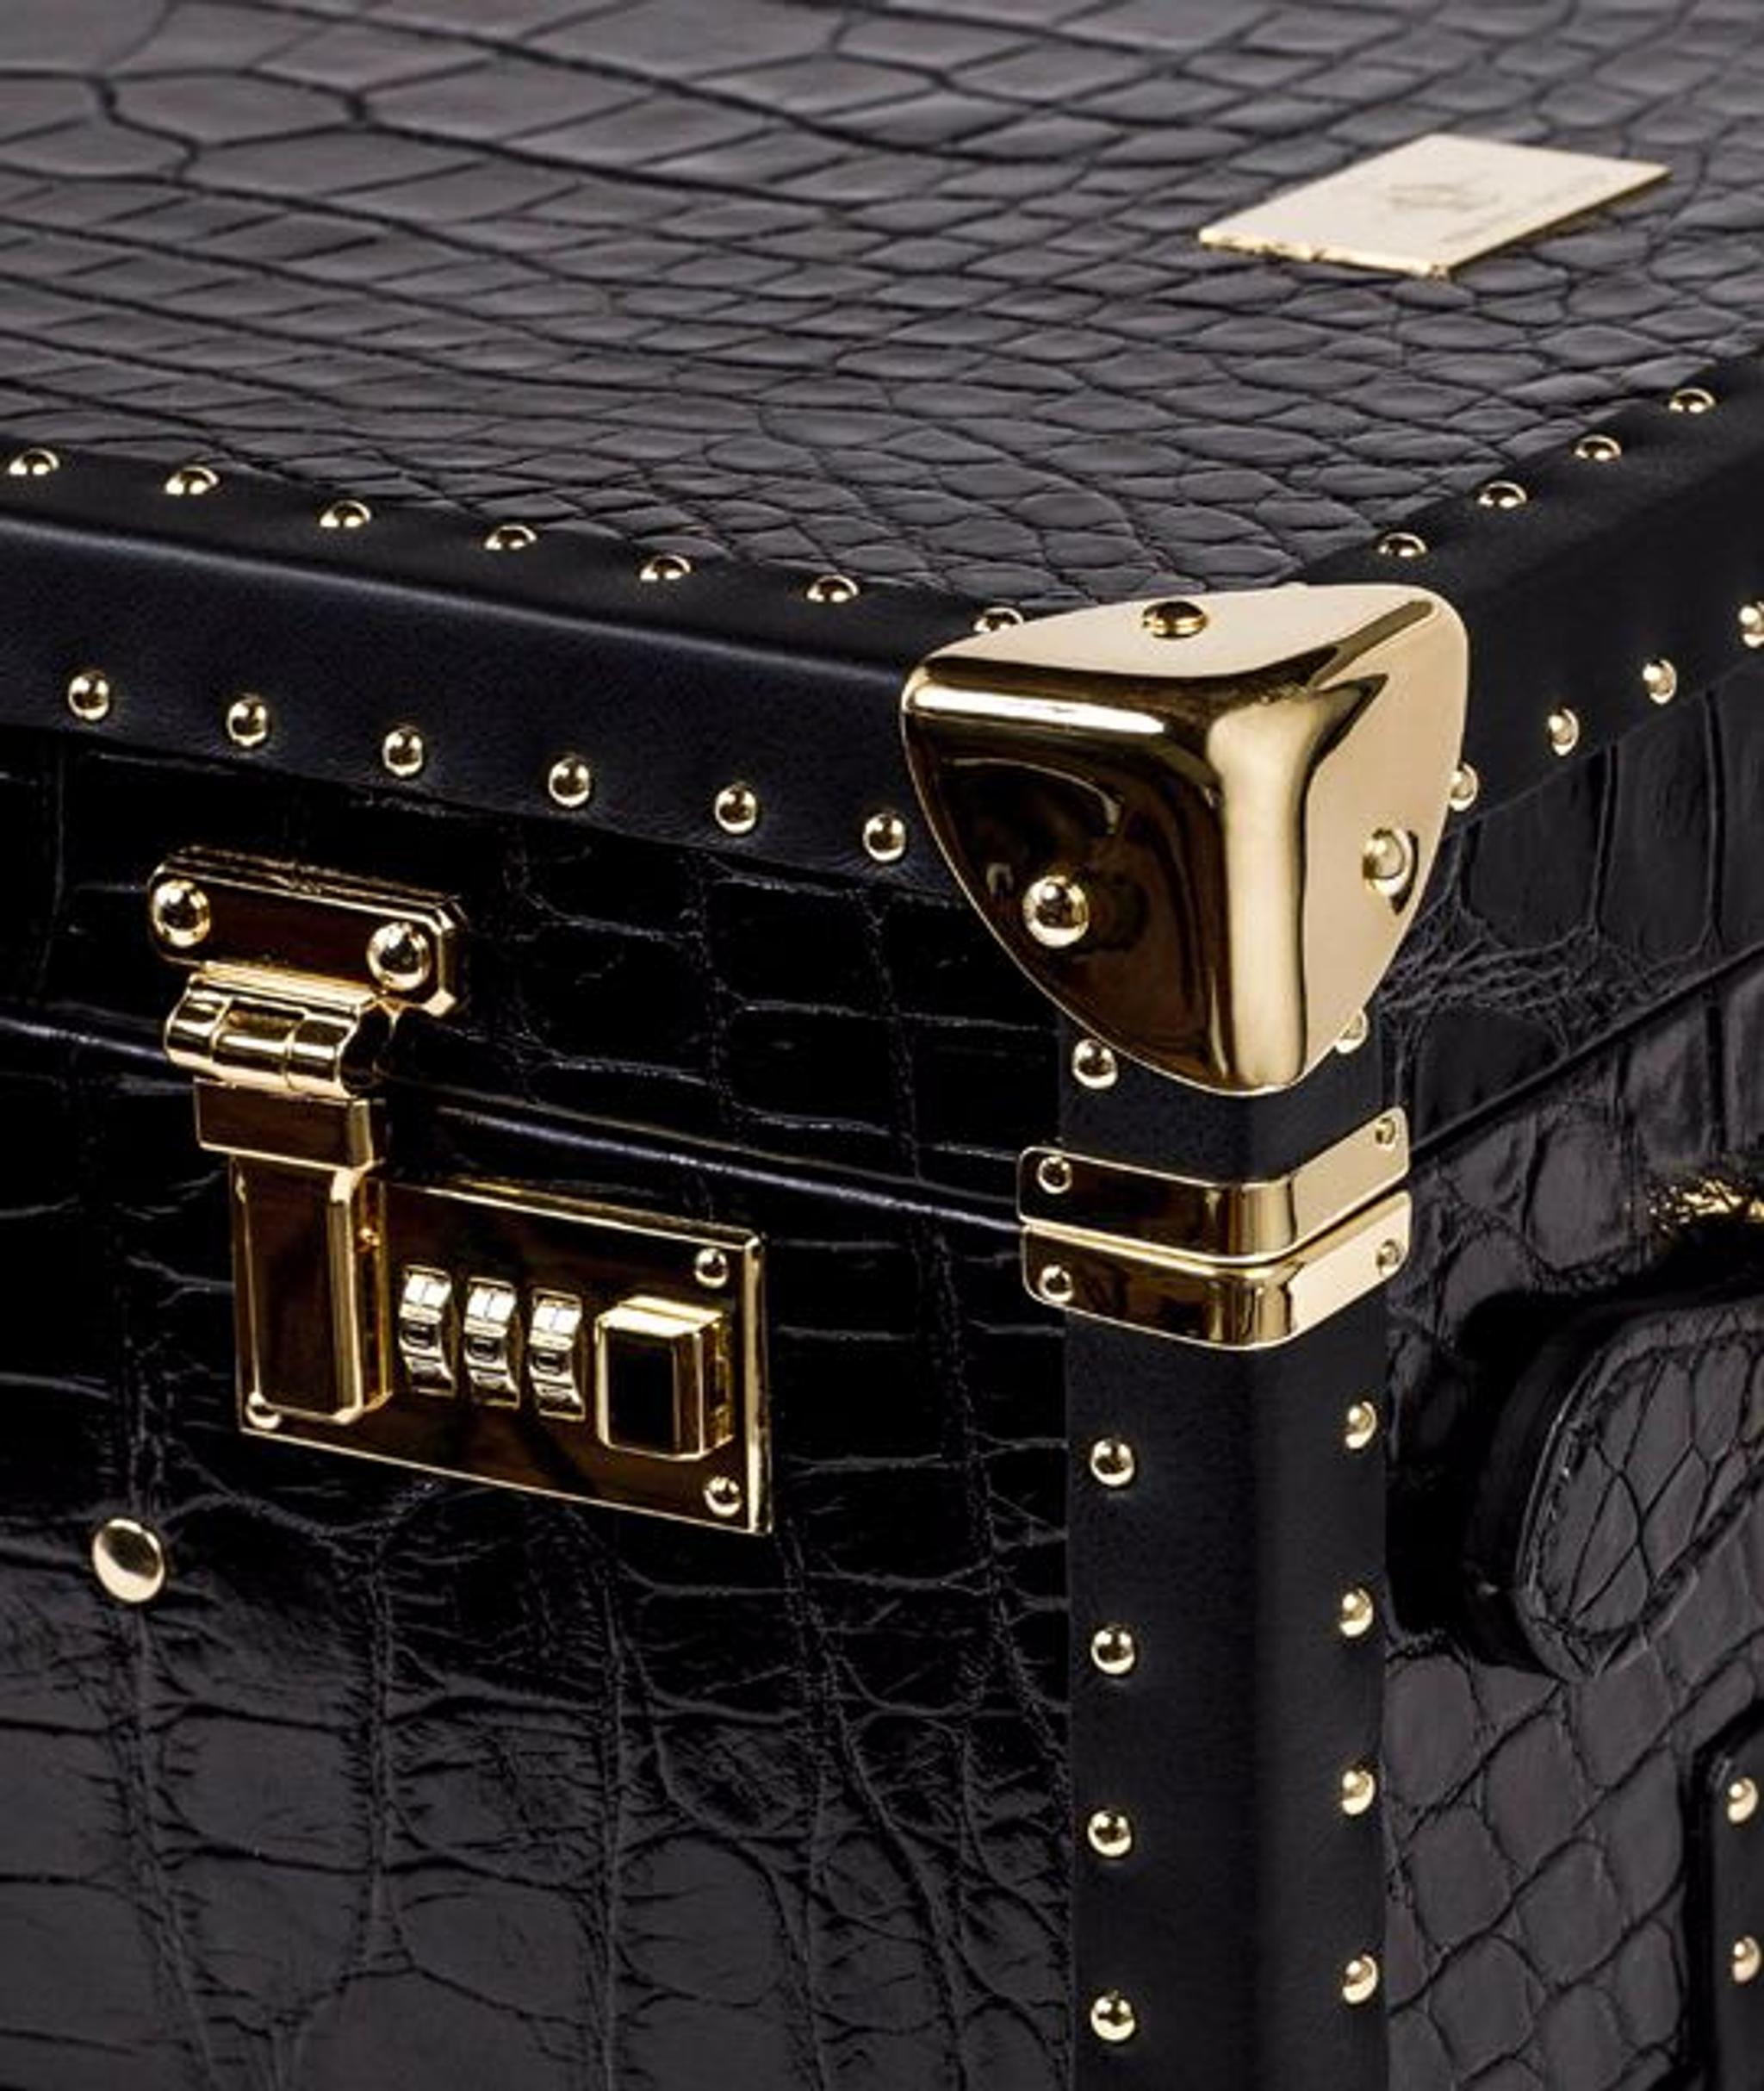 Details of the Small Trolley by Royal Trunk